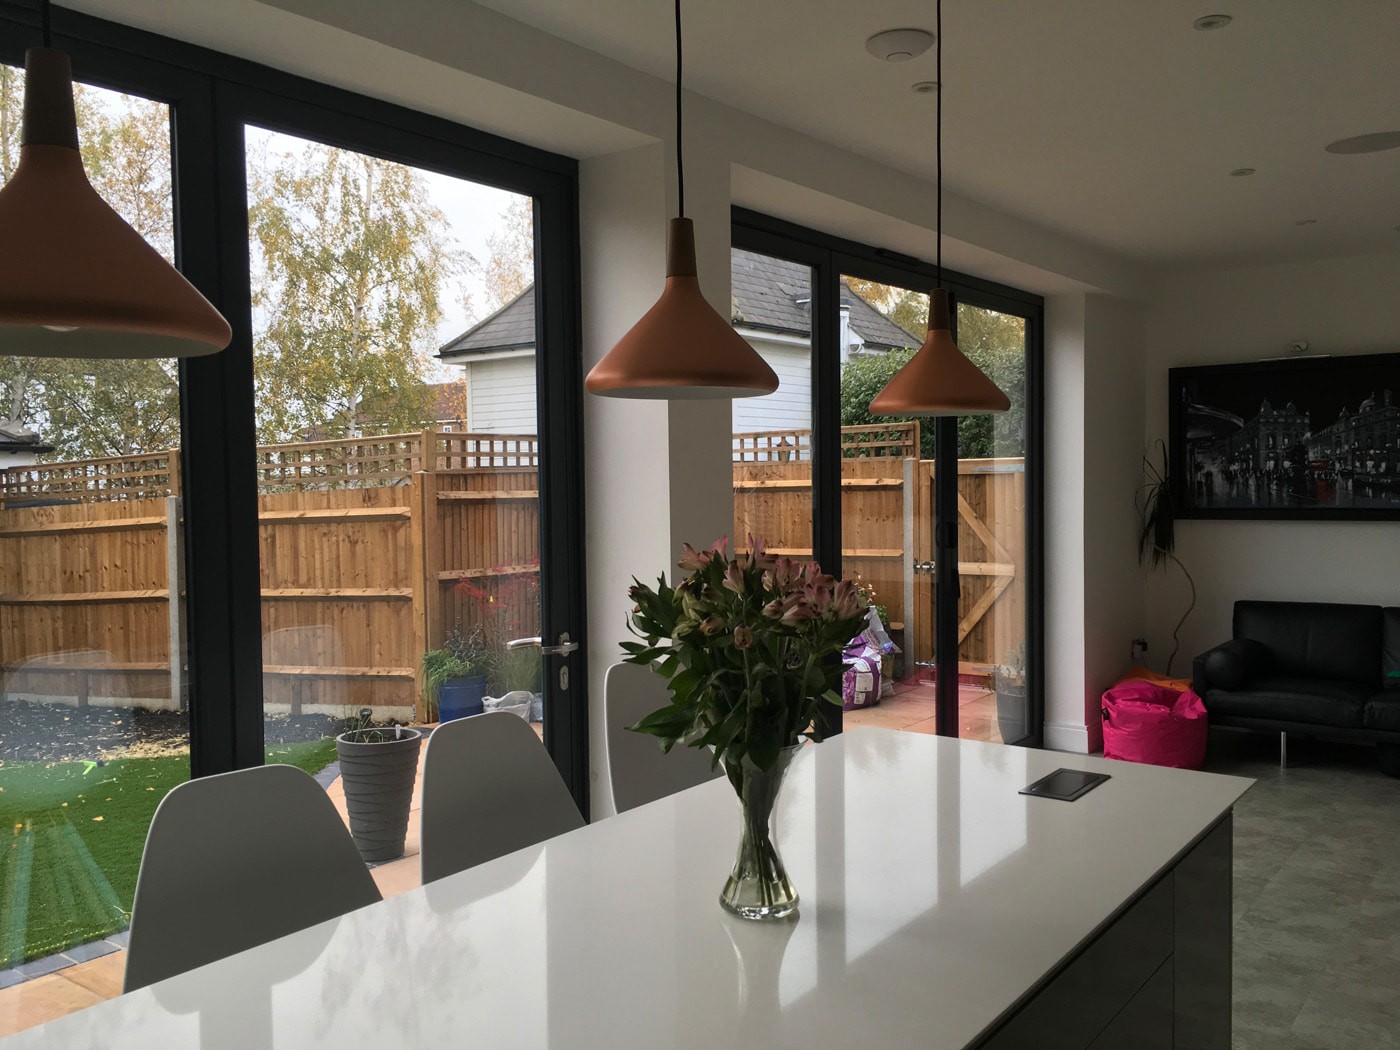 Origin bifolds for homes in Worcester Park - installations from Hamiltons